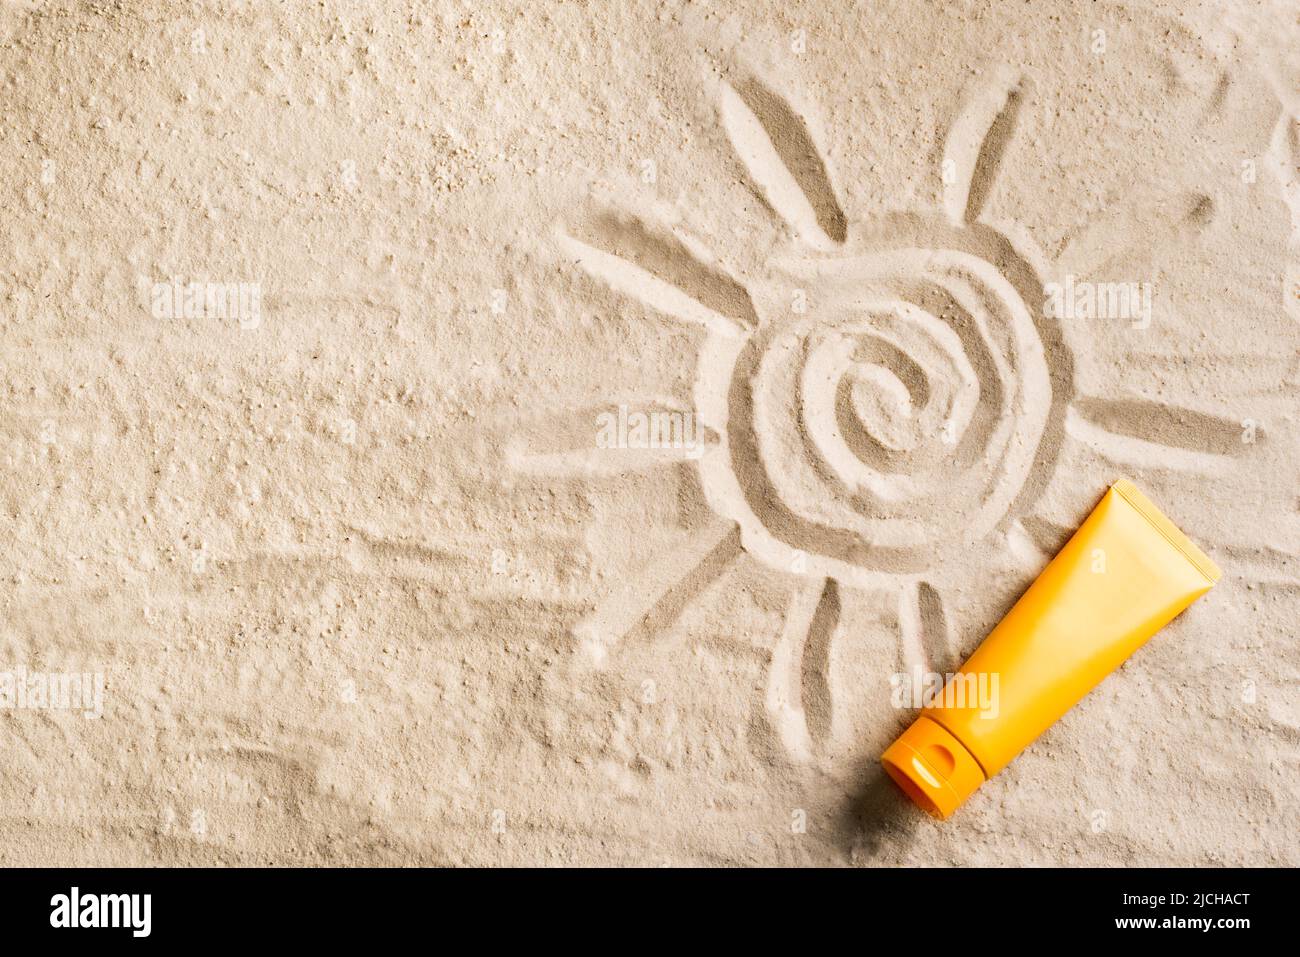 Sunscreen lotion on sandy beach as background, top view, copy space. Summer vacation and skin care concept, spf uv-protect cosmetic product tube. Stock Photo